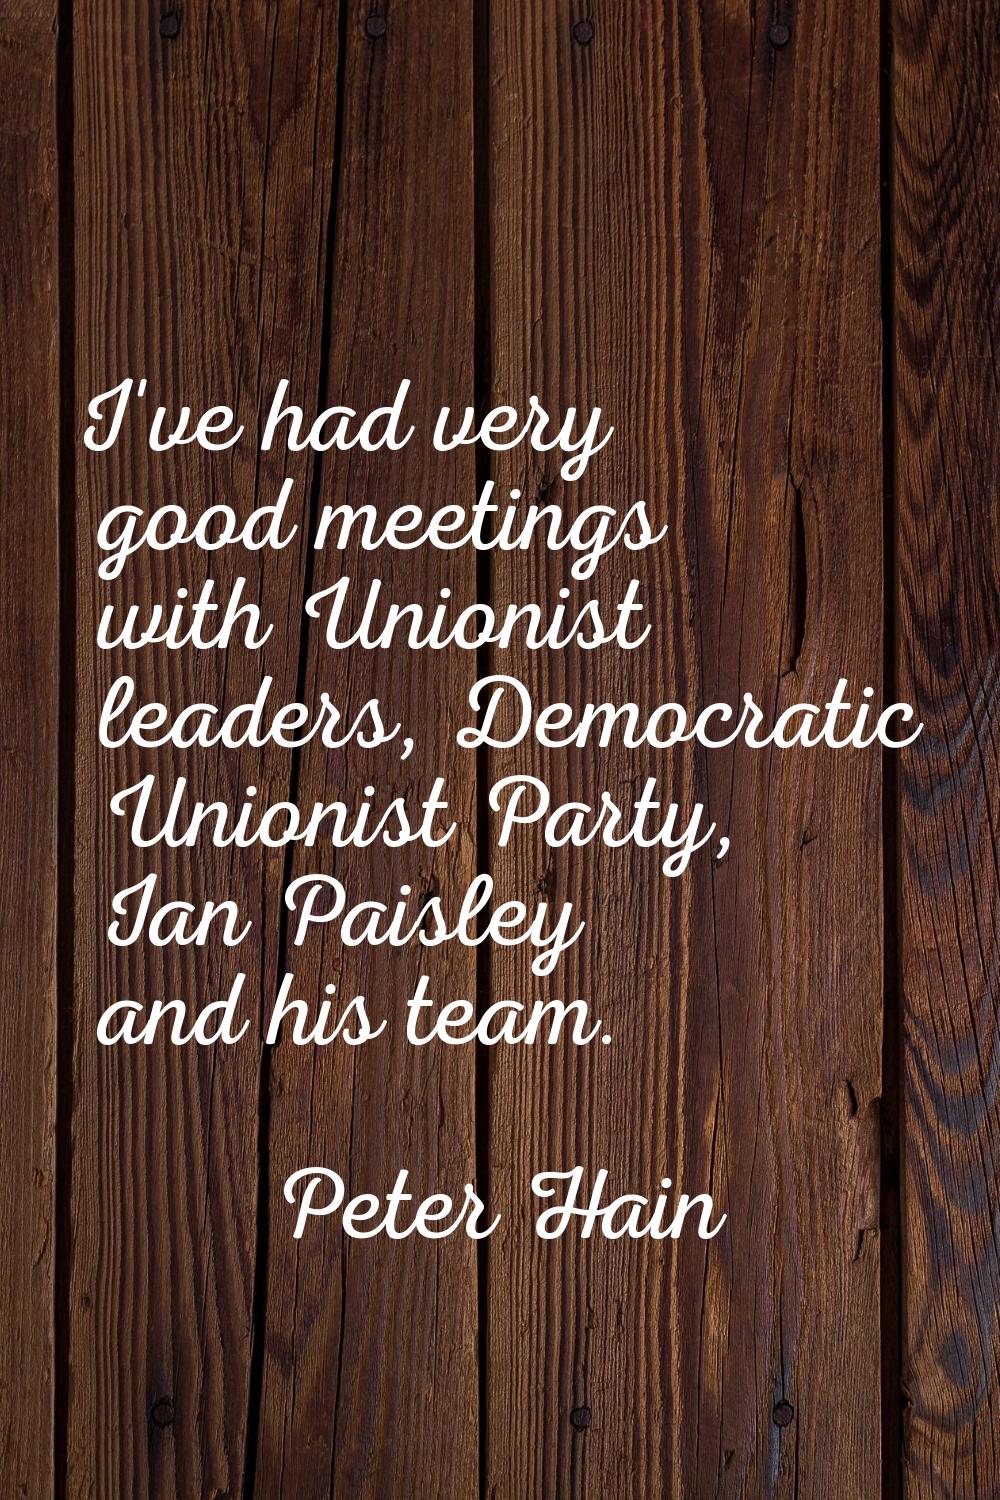 I've had very good meetings with Unionist leaders, Democratic Unionist Party, Ian Paisley and his t